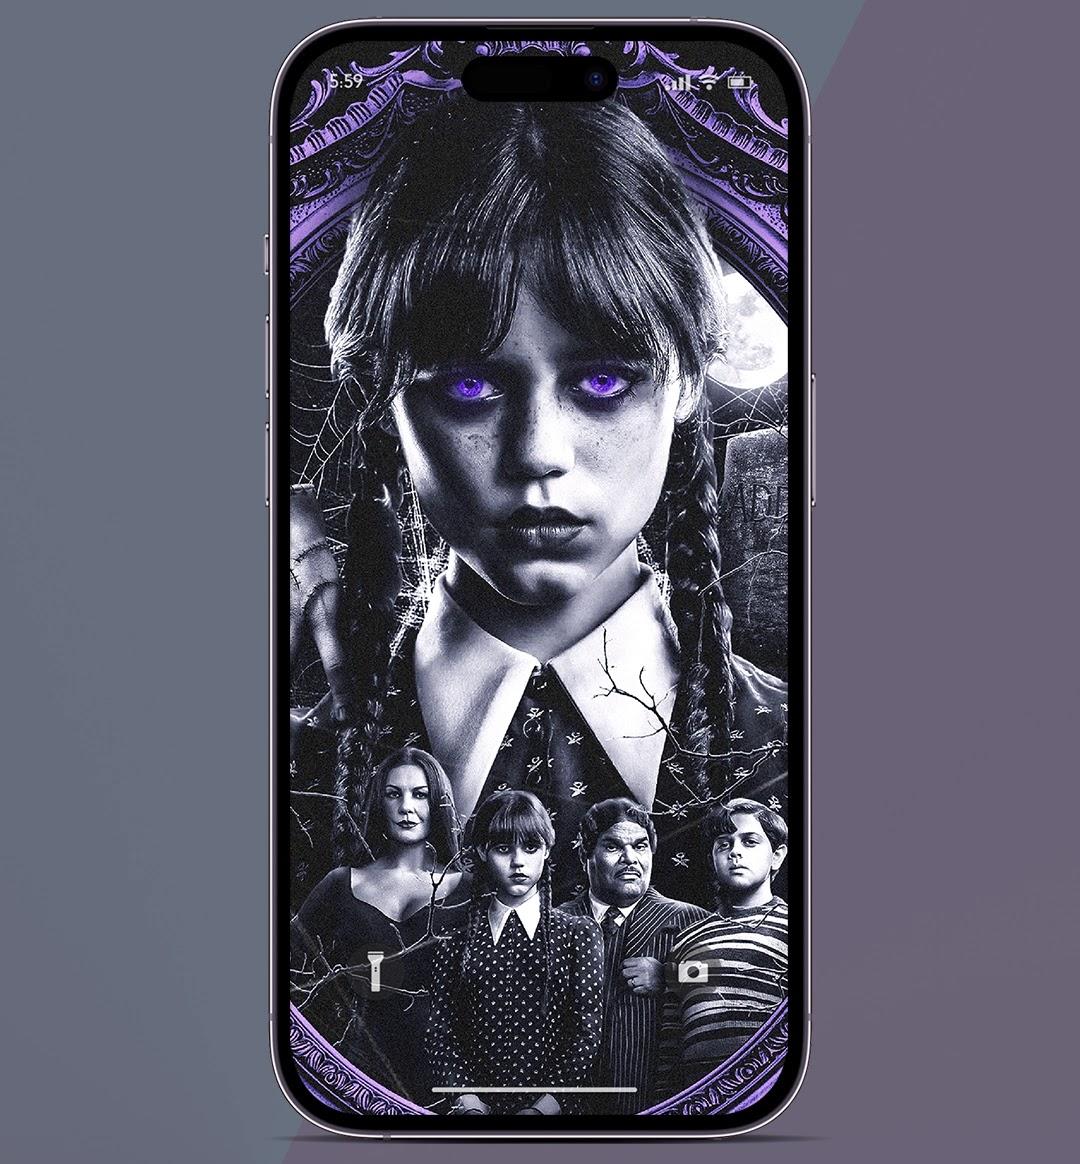 Wednesday Addams Wallpaper HD APK for Android Download